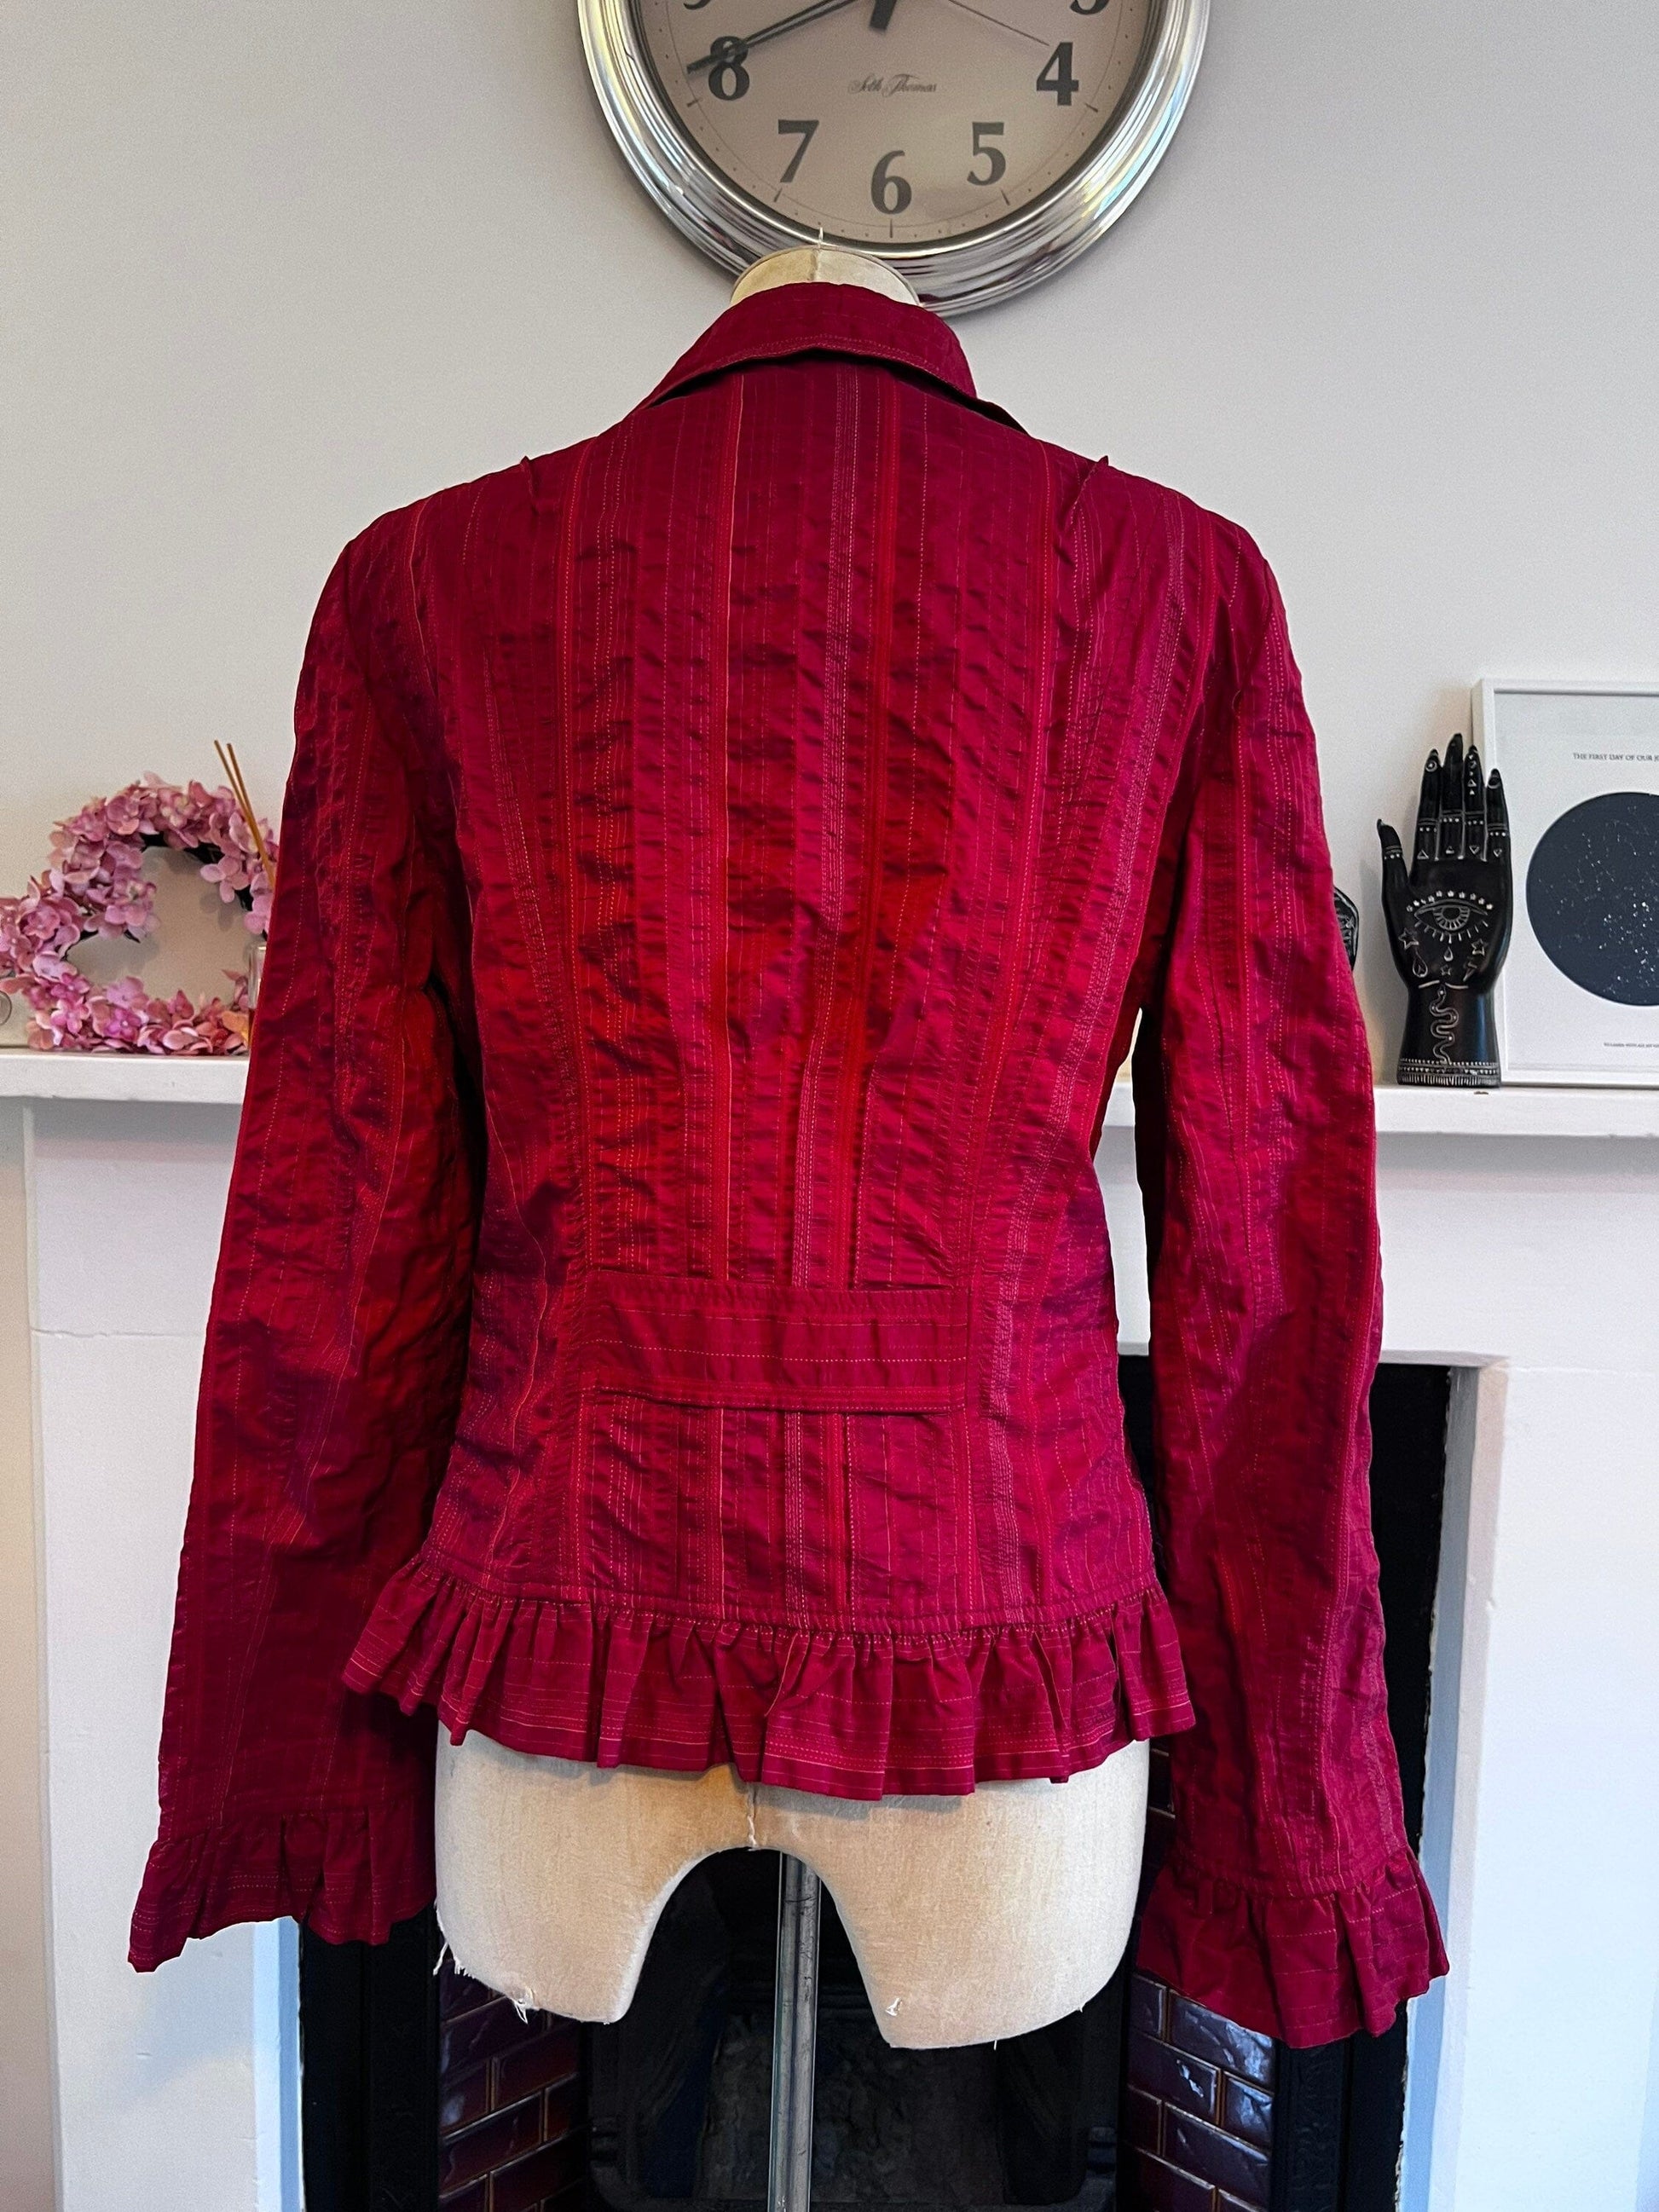 Vintage Red Riding Jacket chunky buttons Scarlet Stripe Blazer Jacket - excellent condition Orwell UK12